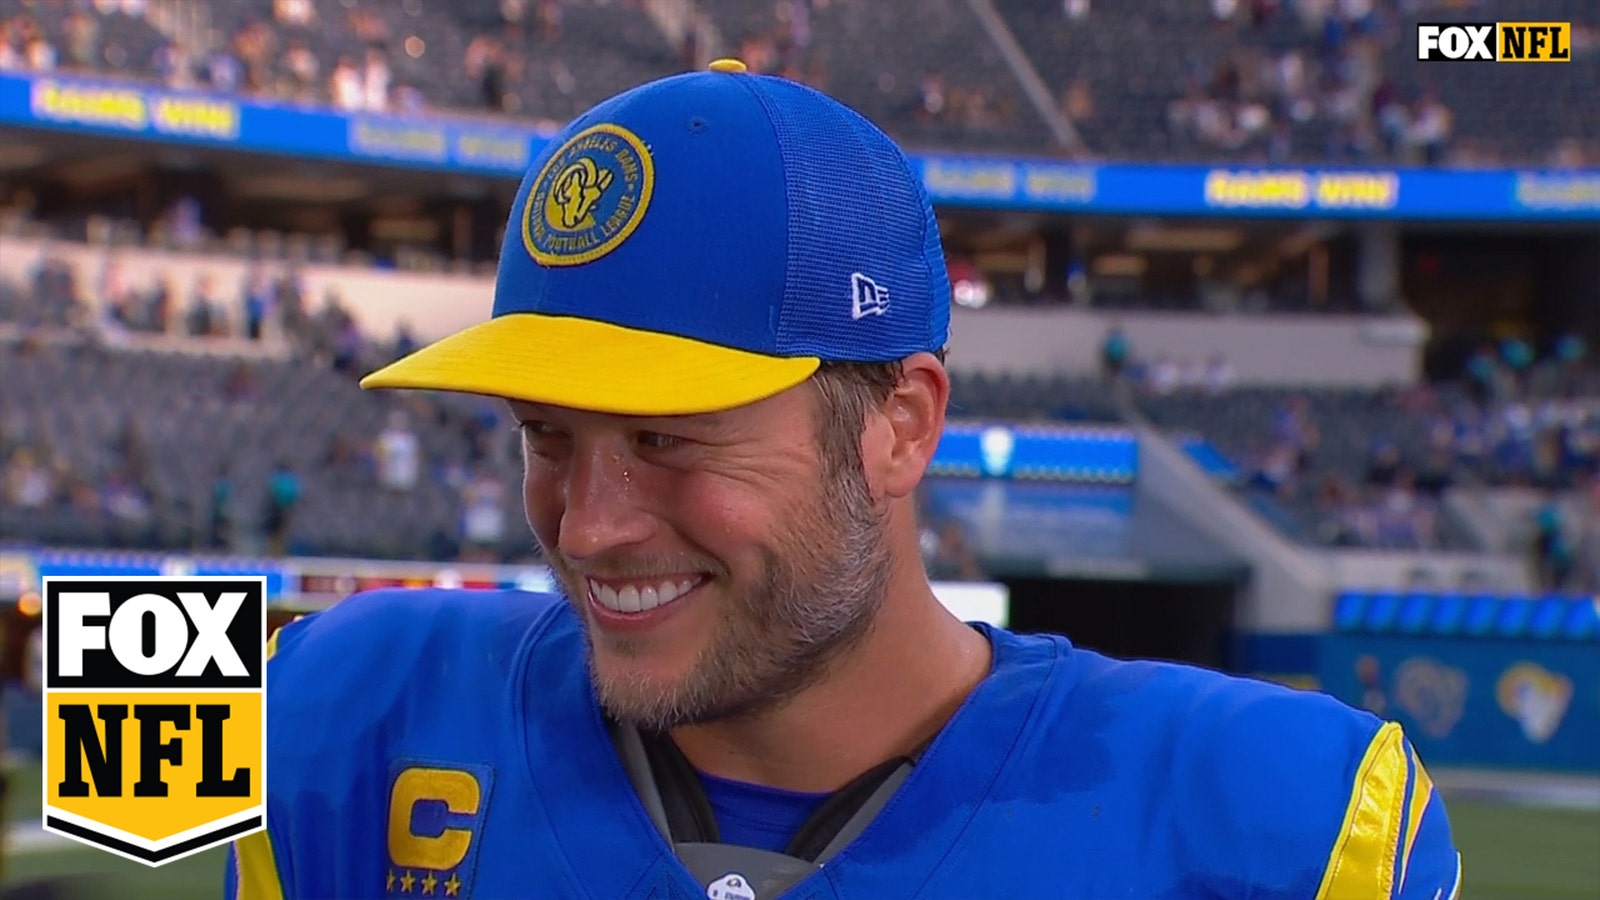 'We're still searching for that complete game' – Mattgew Stafford on Rams' win over Cardinals